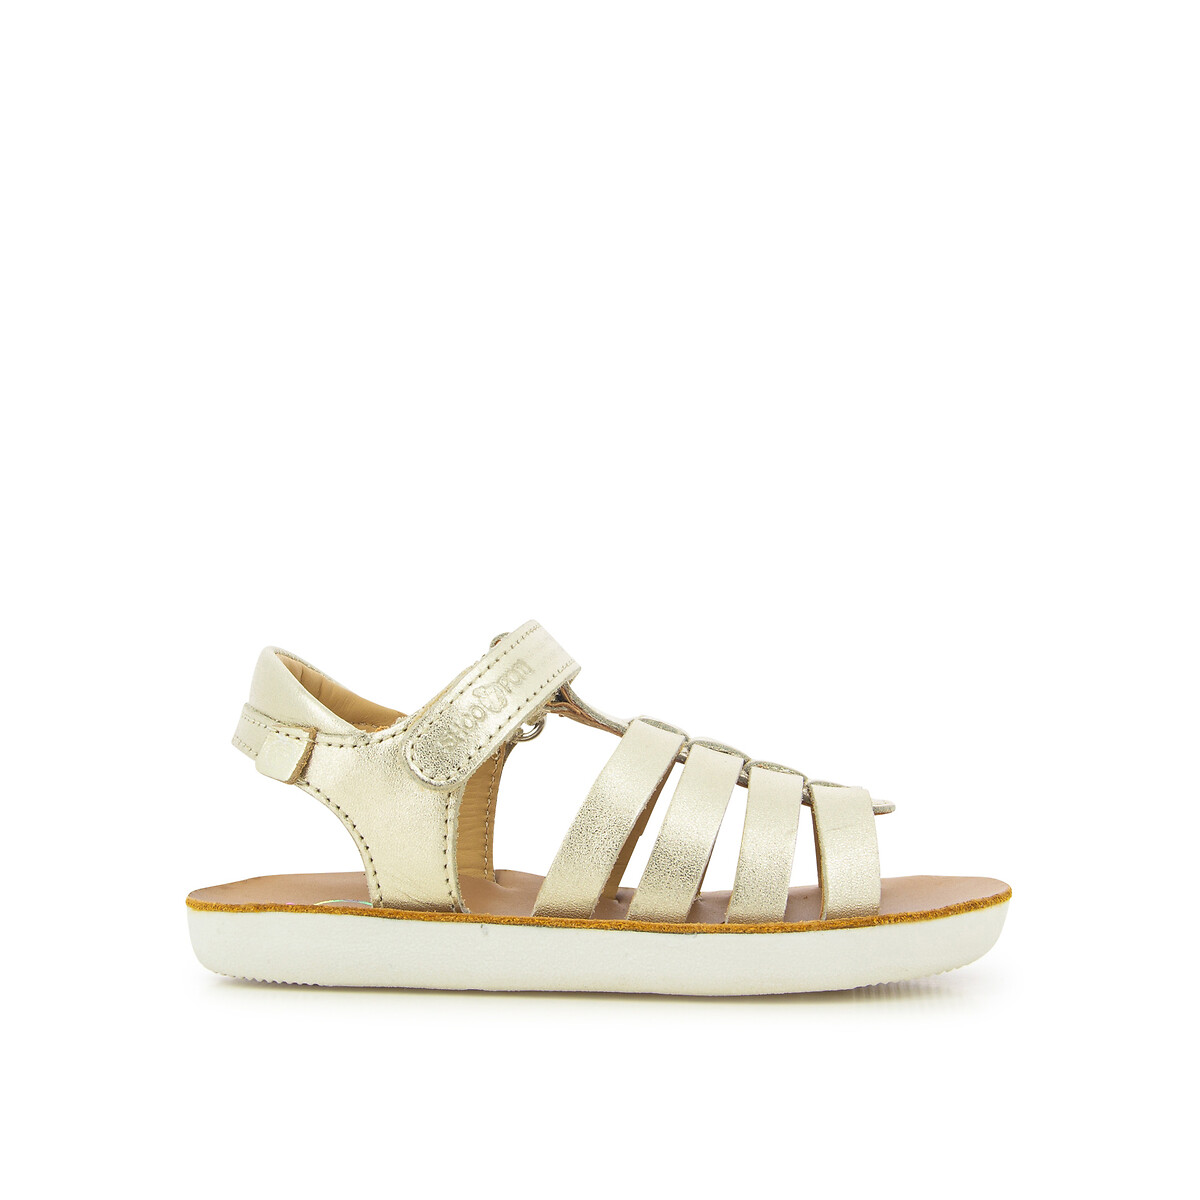 Kids Goa Spart Sandals in Leather with Touch ’n’ Close Fastening